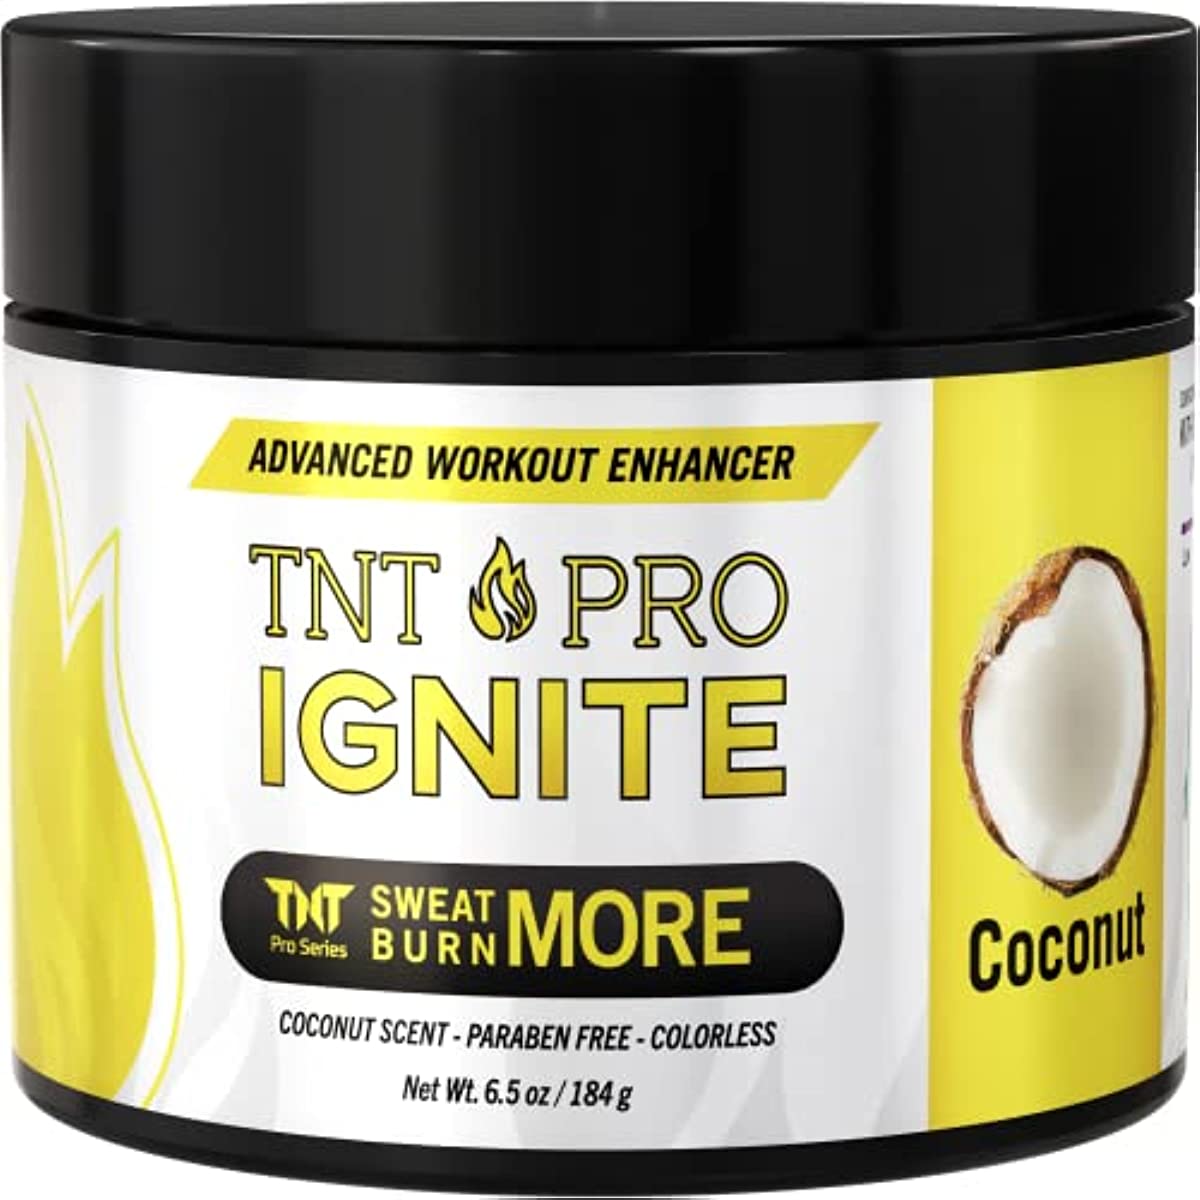 TNT Workout Enhancer Sweat Gel: Hot Cream for Tummy Belly Firming, Sweet Scent - Thigh & Arm Hot Sweat Cream: Exercise Thermogenic Cream for Men & Women, Skin Tightening Heat Lotion, Sweet Coconut